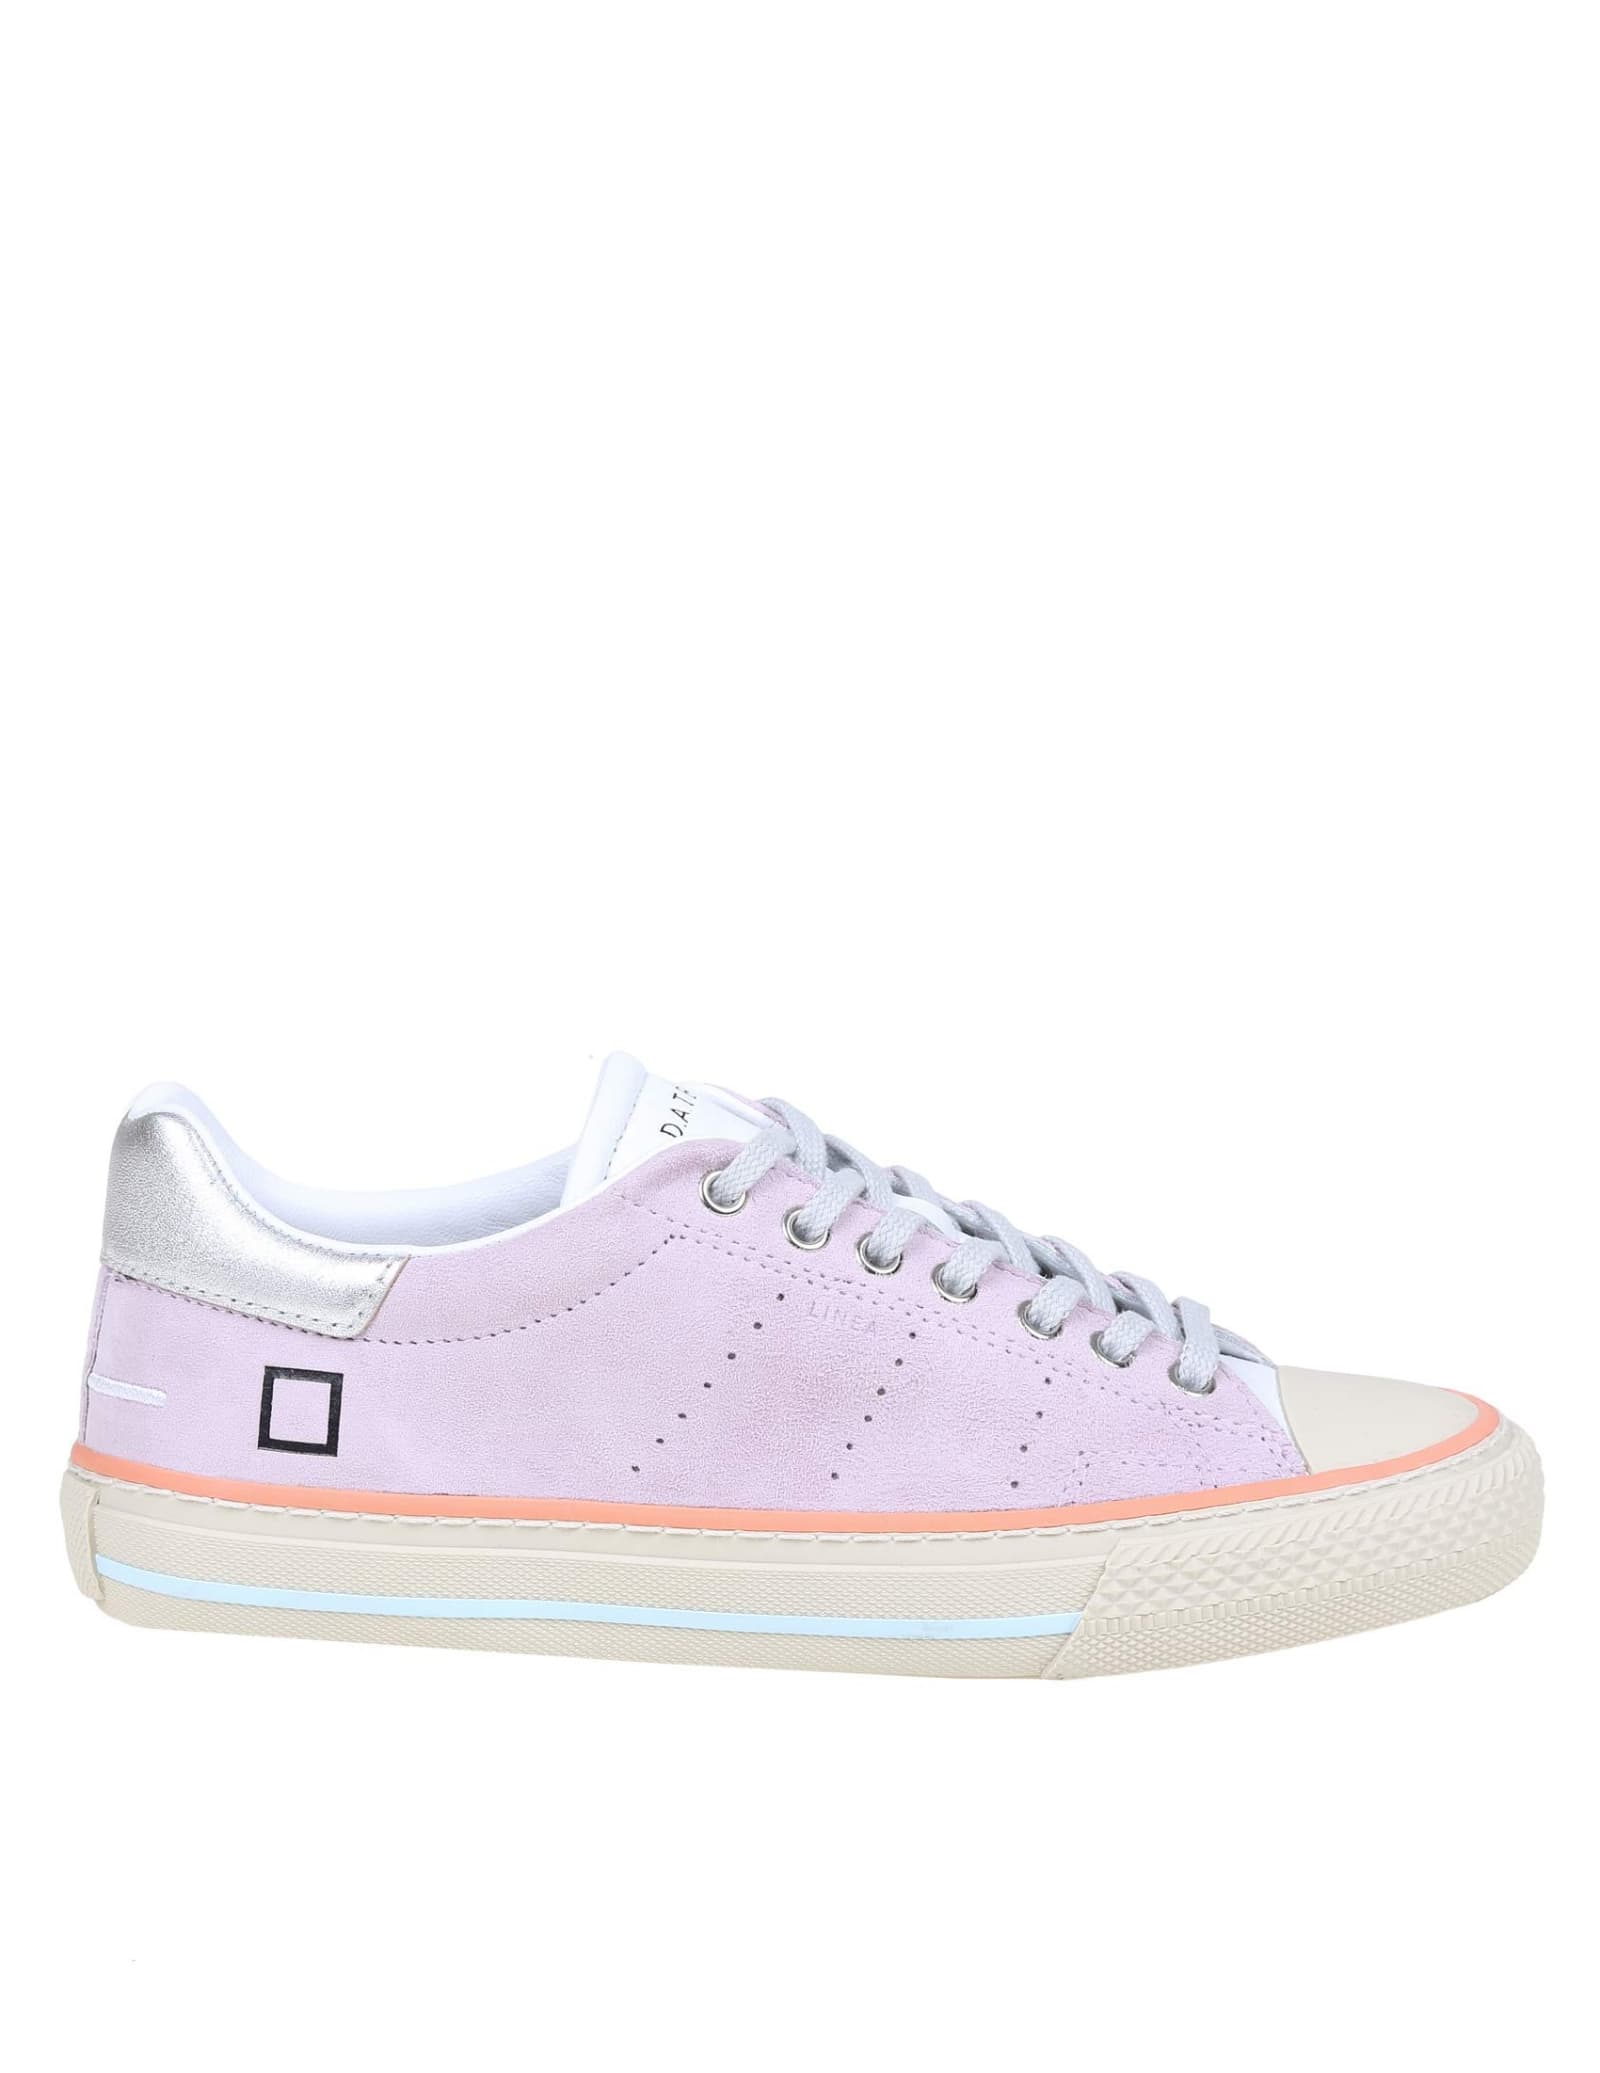 D.A.T.E. At Your Place. Sneakers In Suede And Lilac Color